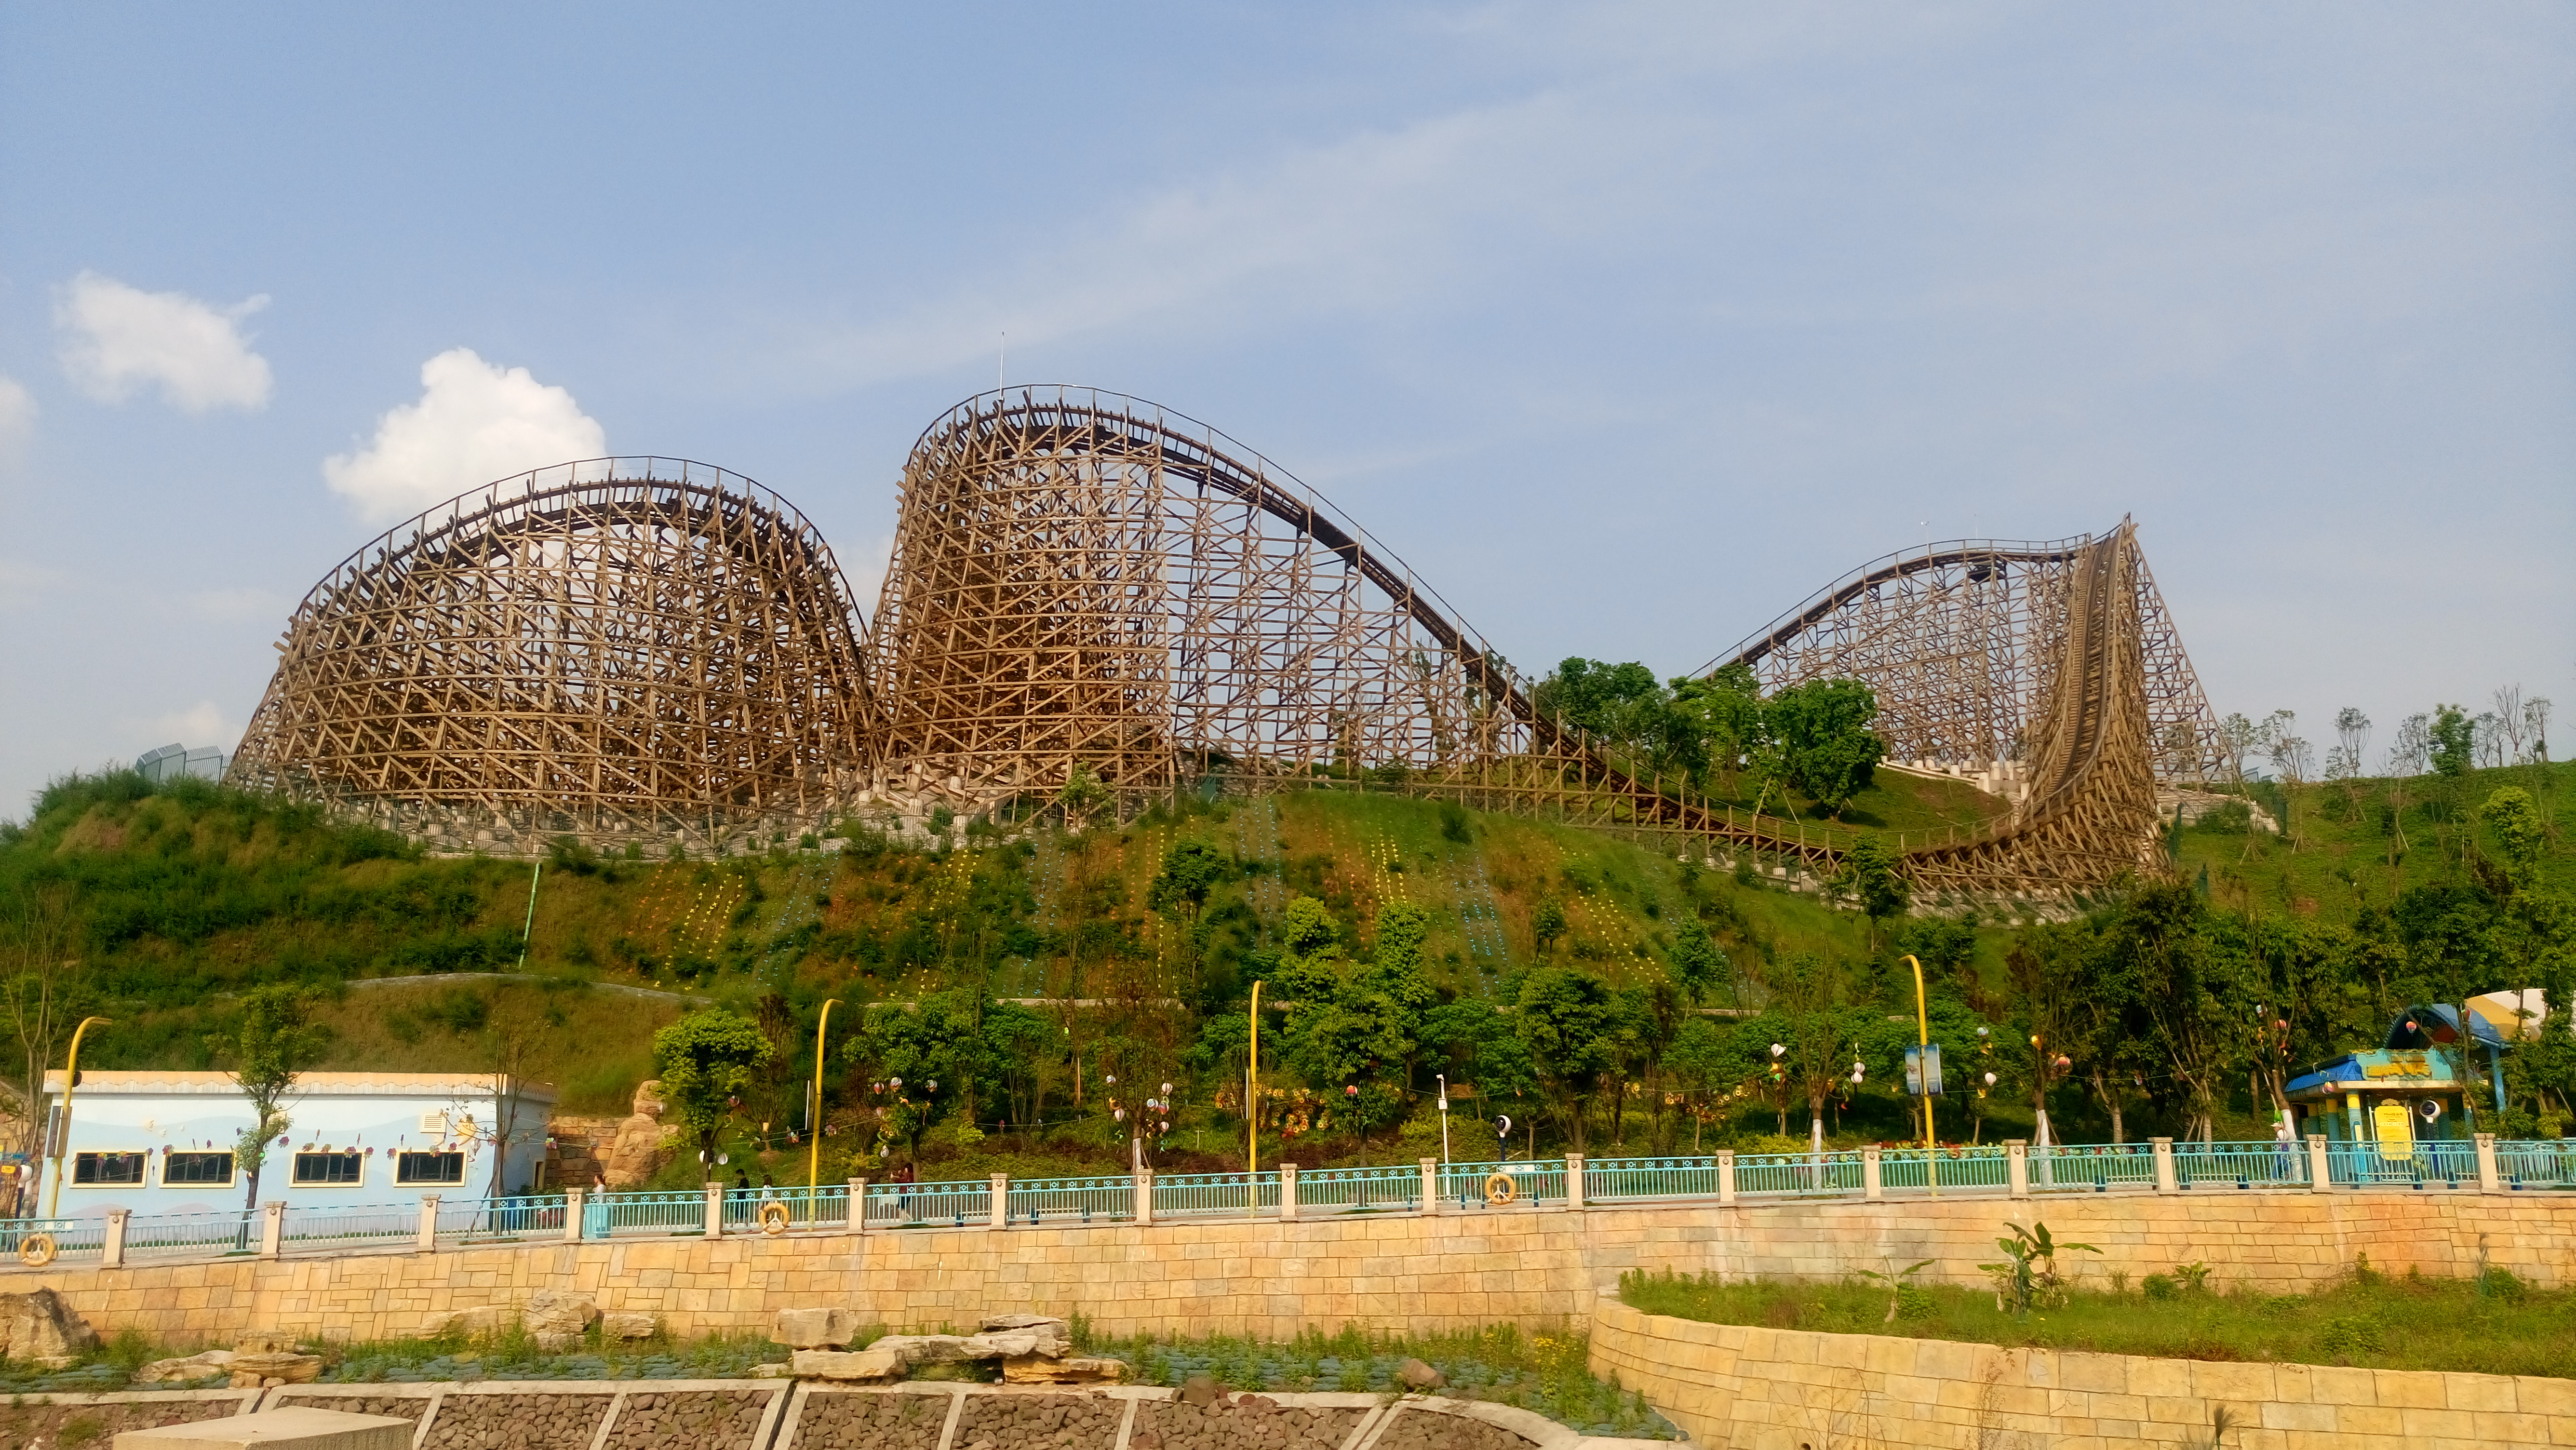 Playland's world-renowned wooden roller-coaster turns 65